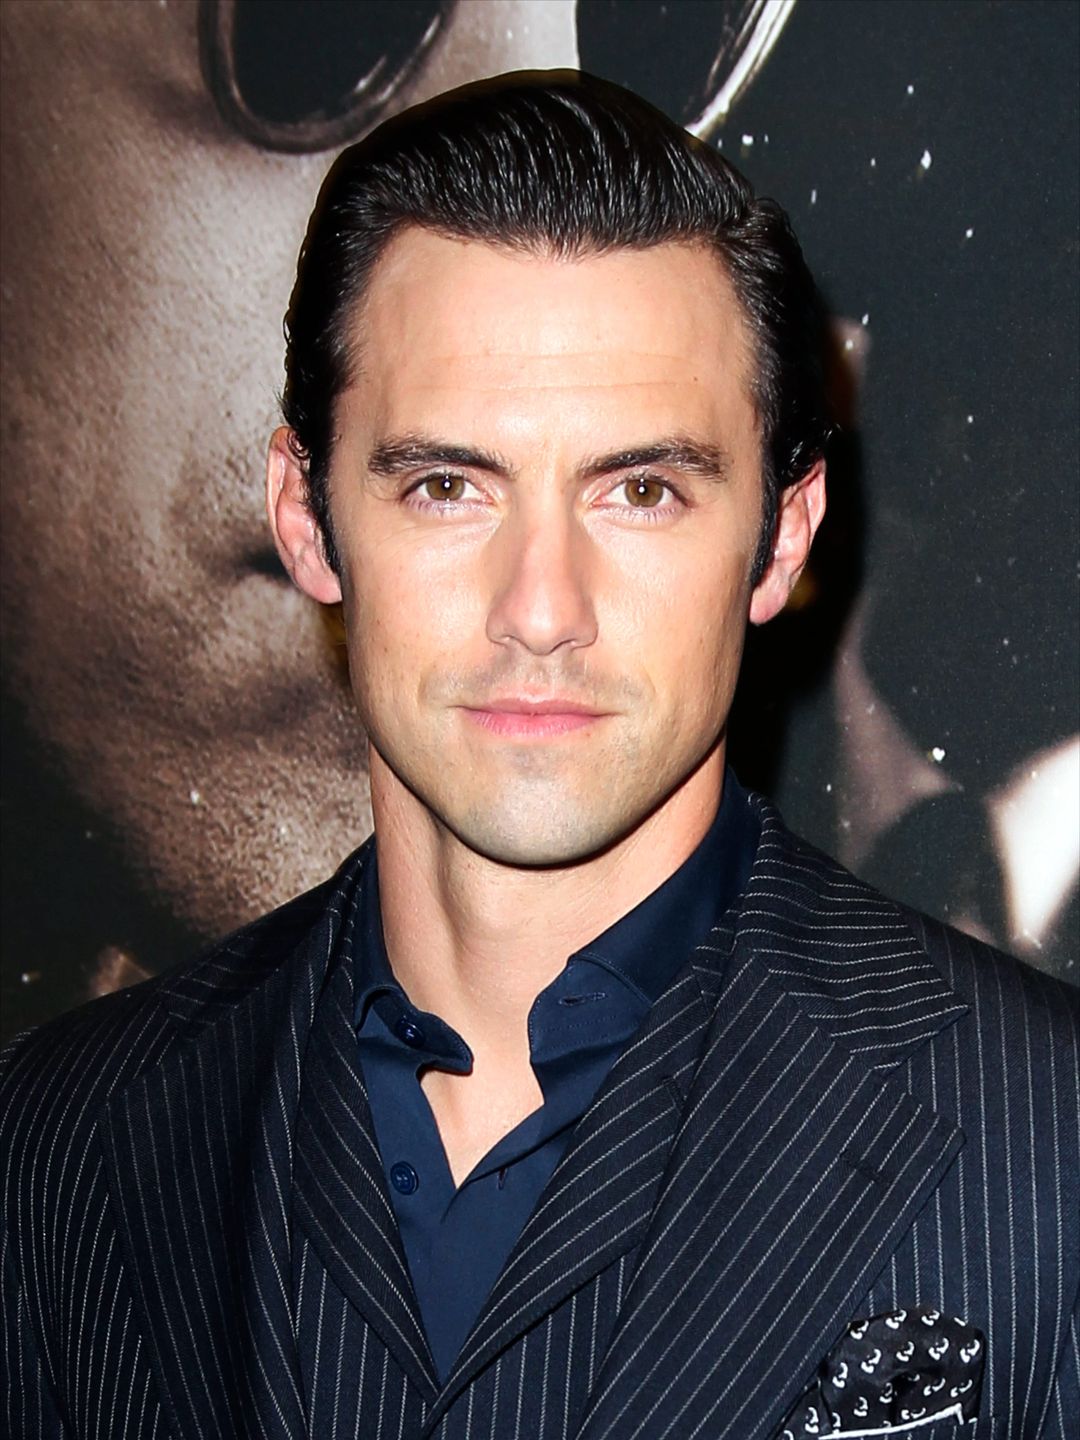 Milo Ventimiglia does he have a wife